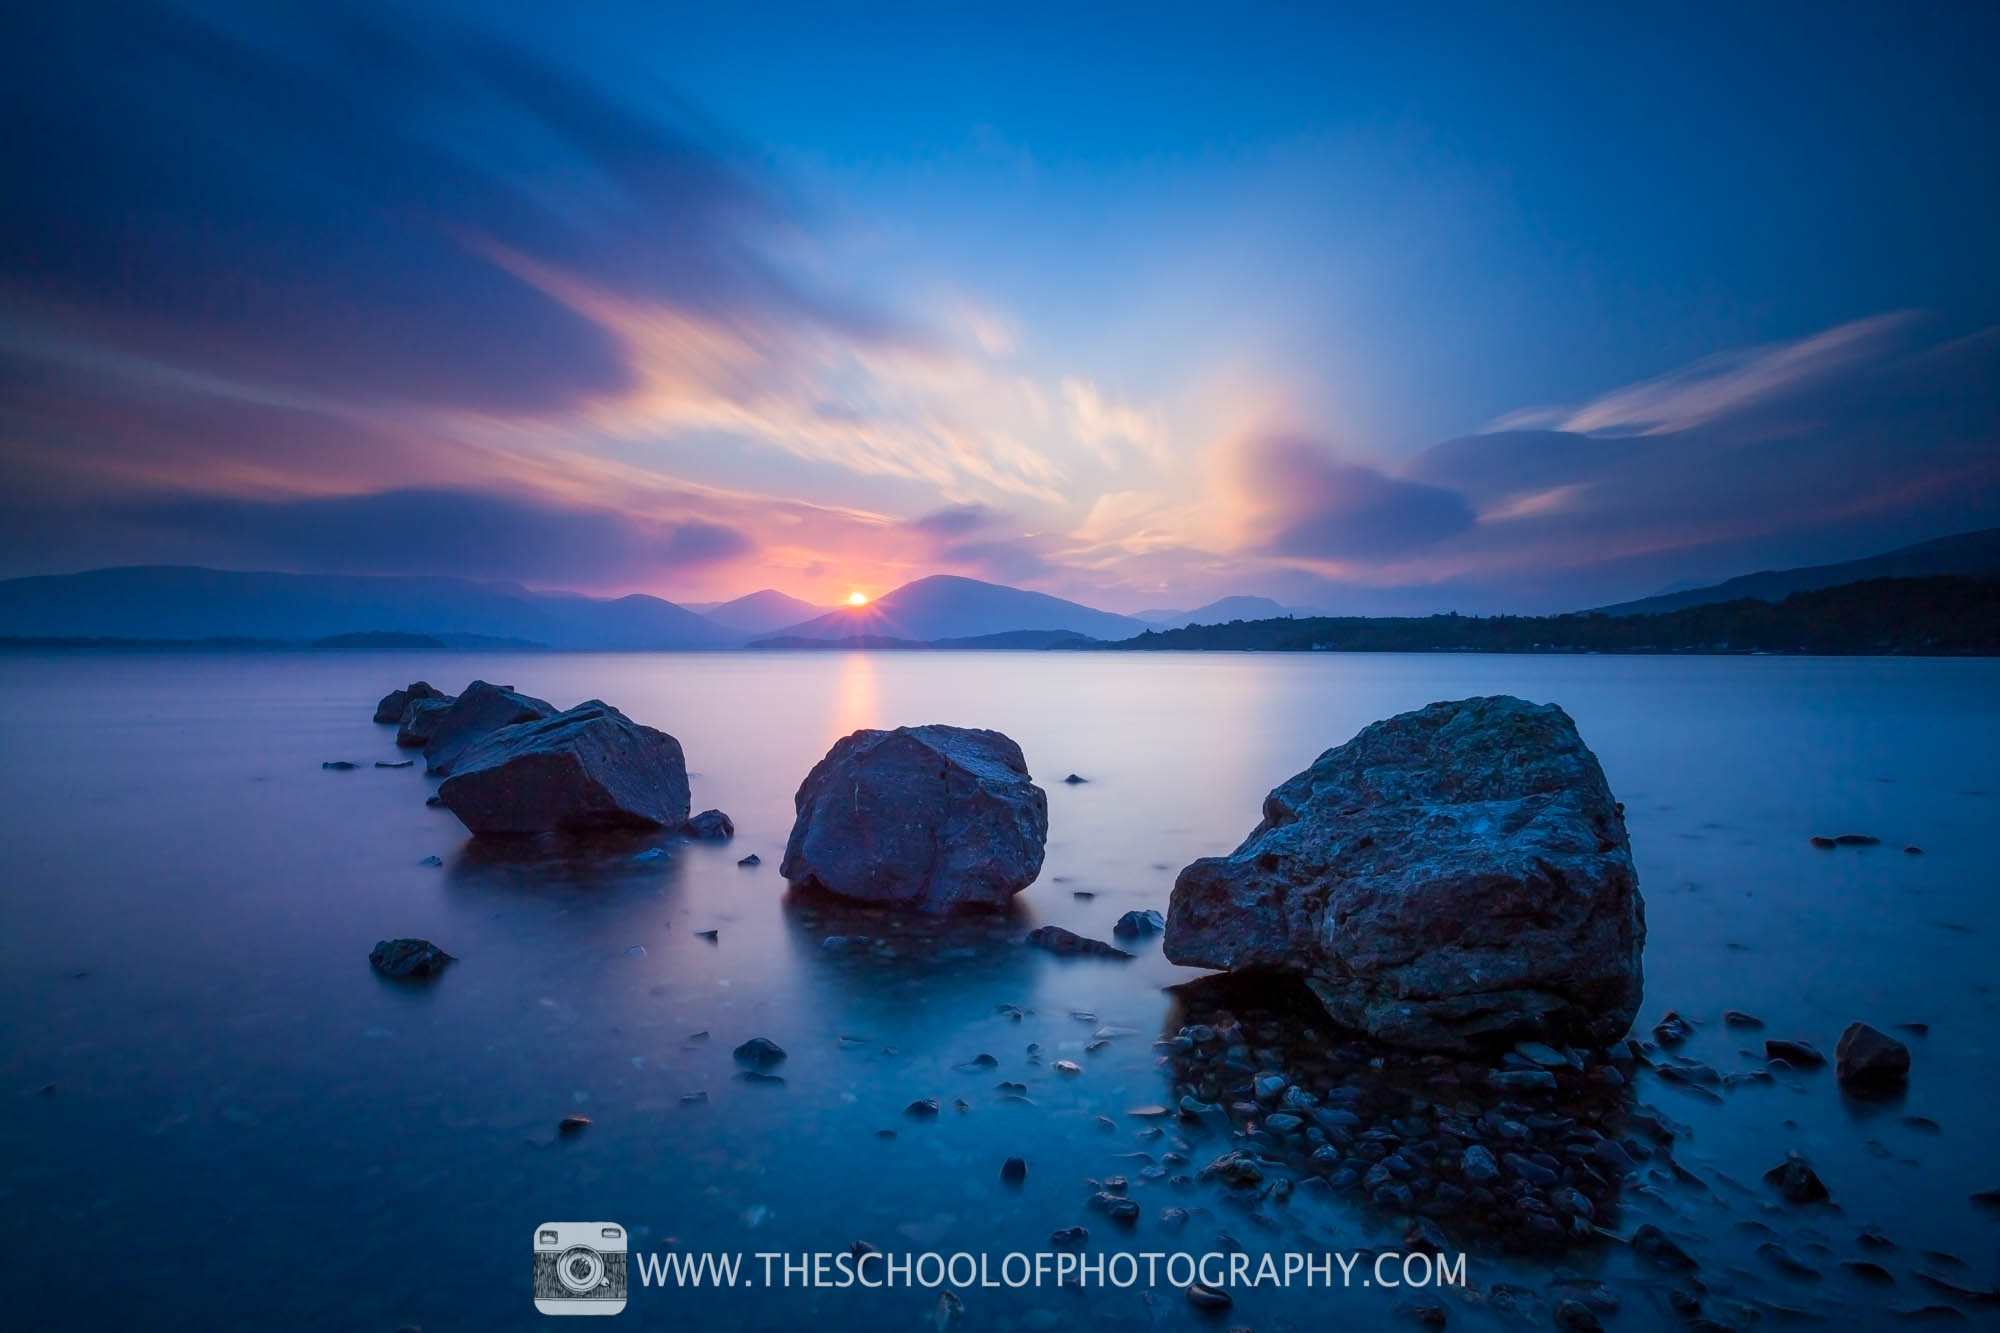 ND Filters – In Depth Guide For Beginners — The School of Photography -  Courses, Tutorials & Books